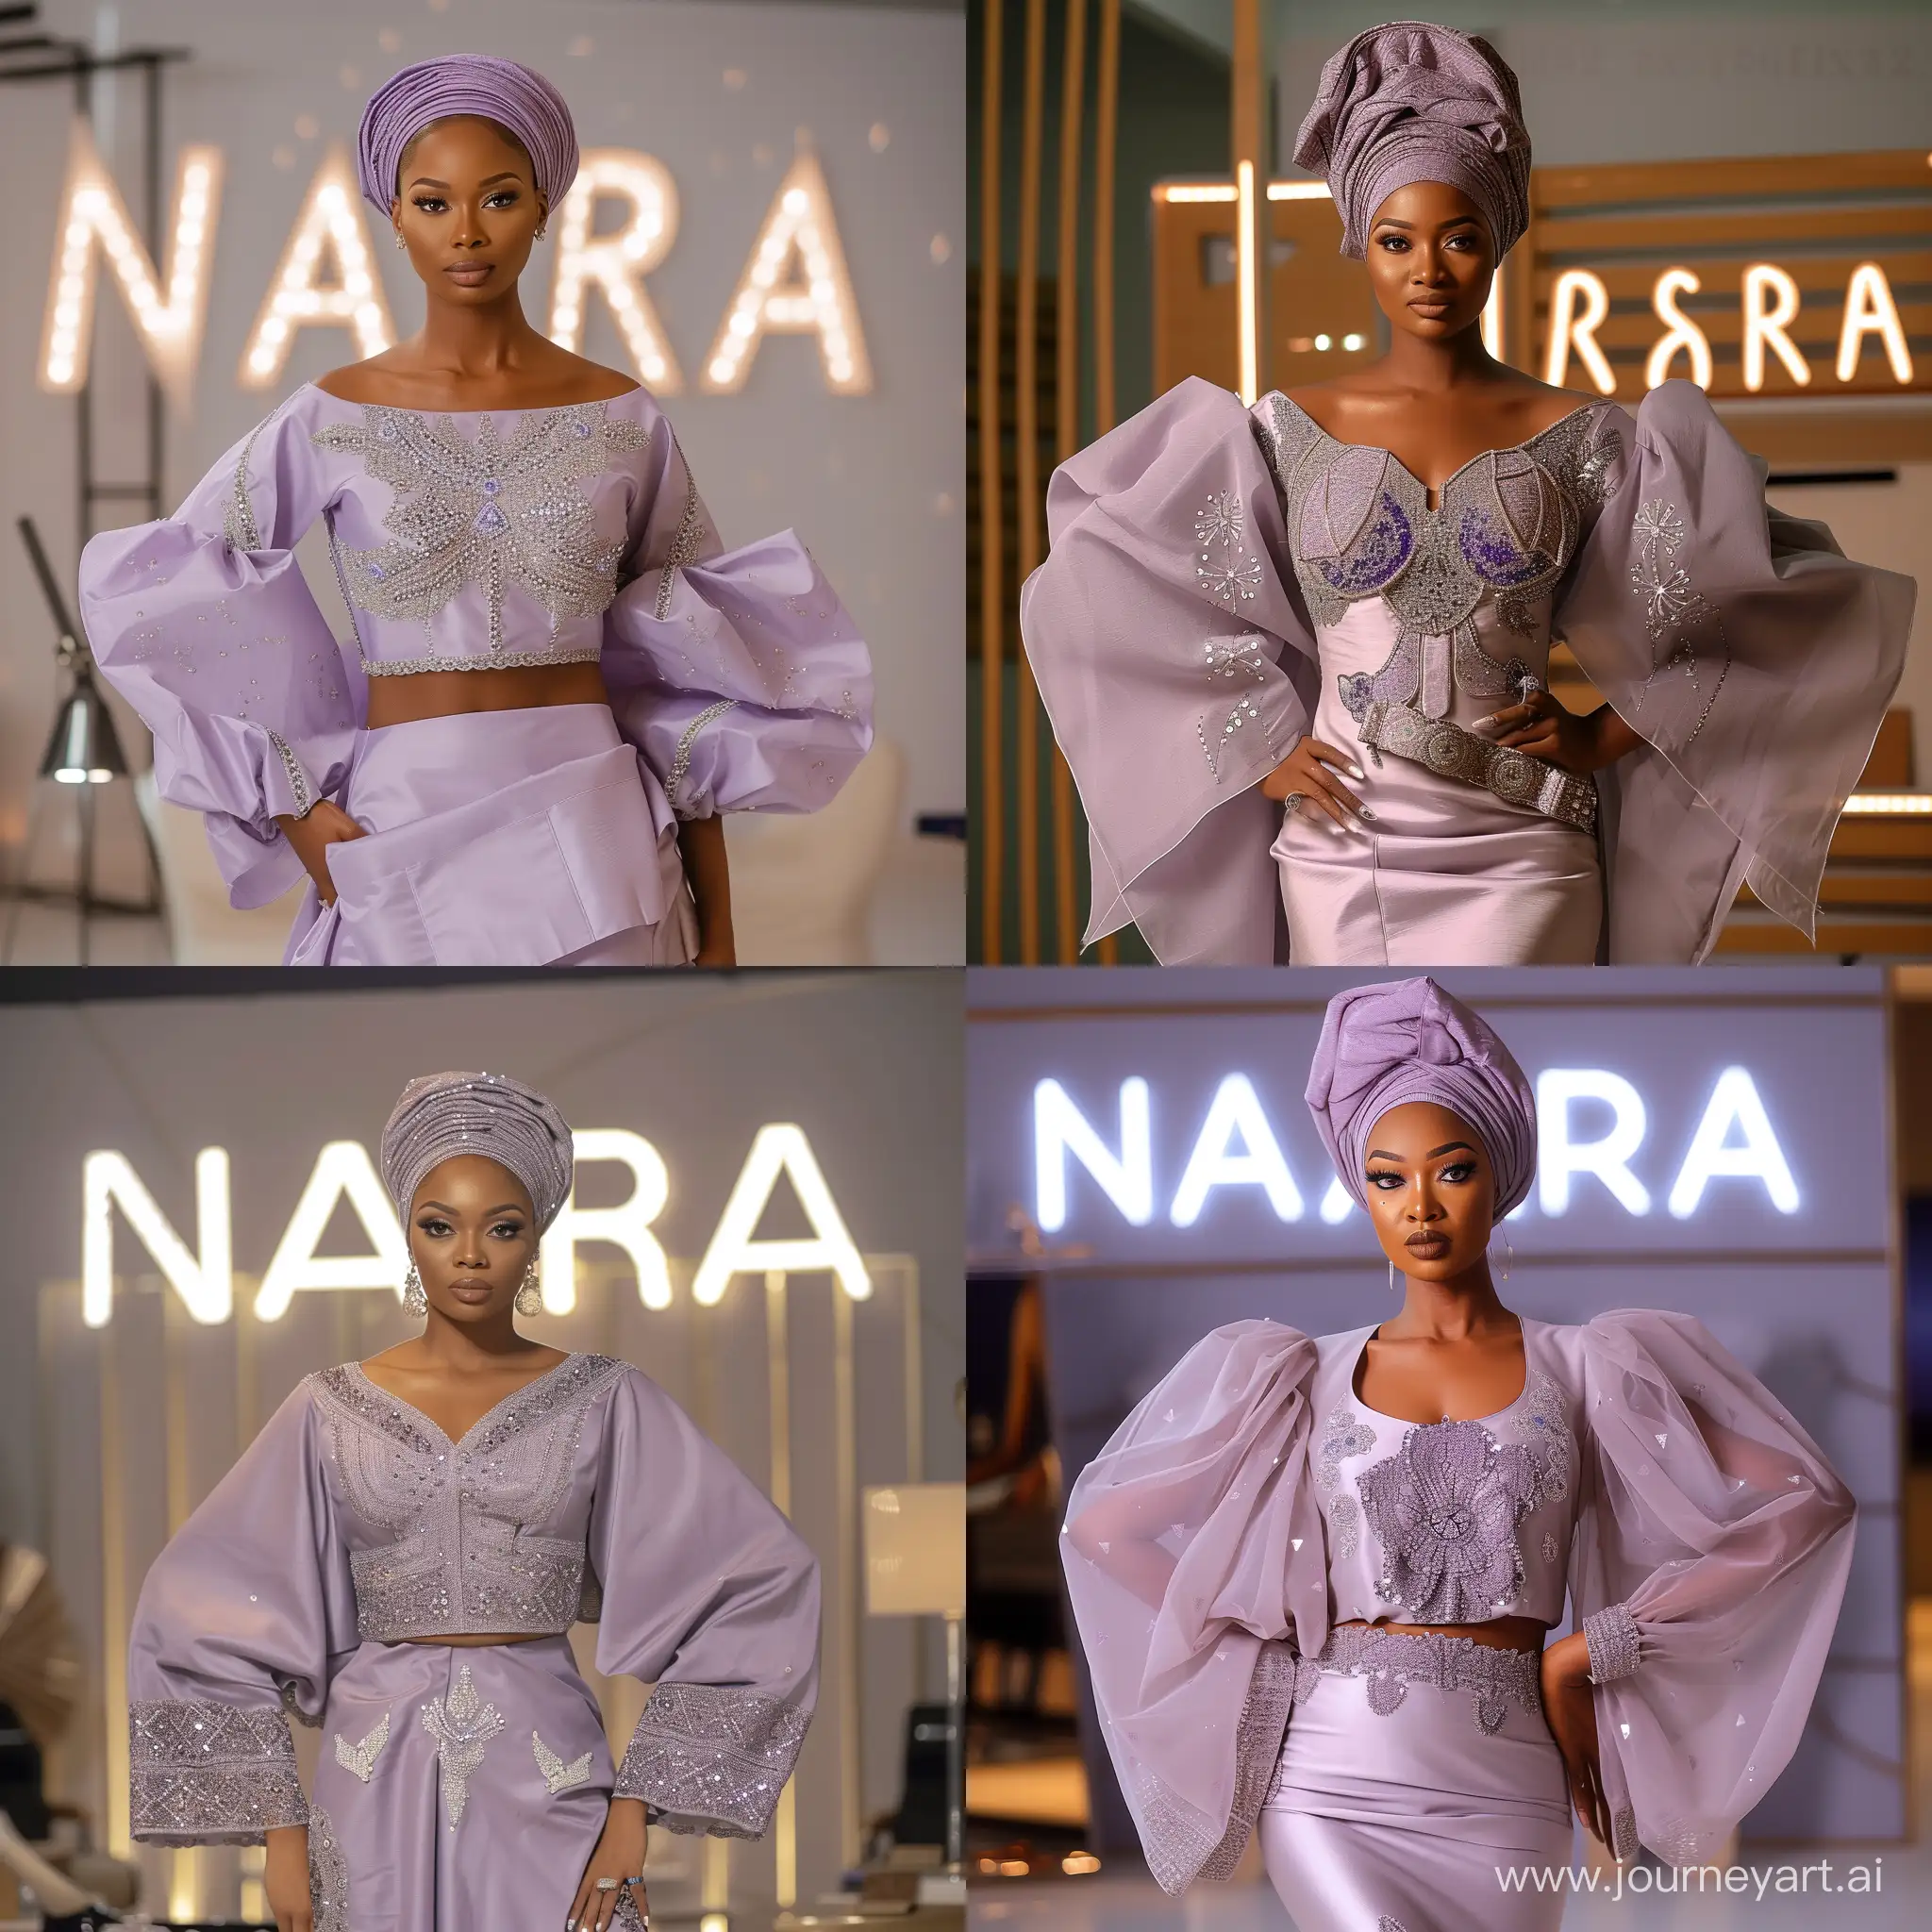 Create an image of a Nigerian woman with a slender physique, elegantly attired in a traditional Boubou garment in a soft lavender. The Boubou is made from a blend of silk and organza, with wide, refined sleeves. The front features tasteful silver and lavender diamond decorations. Her hair is styled with a traditional Hausa head wrap simply to complement the outfit's sophistication. The backdrop is a showroom with the word NASARA written in hold lights highlighting her grace and the cultural significance of her traditional dress.